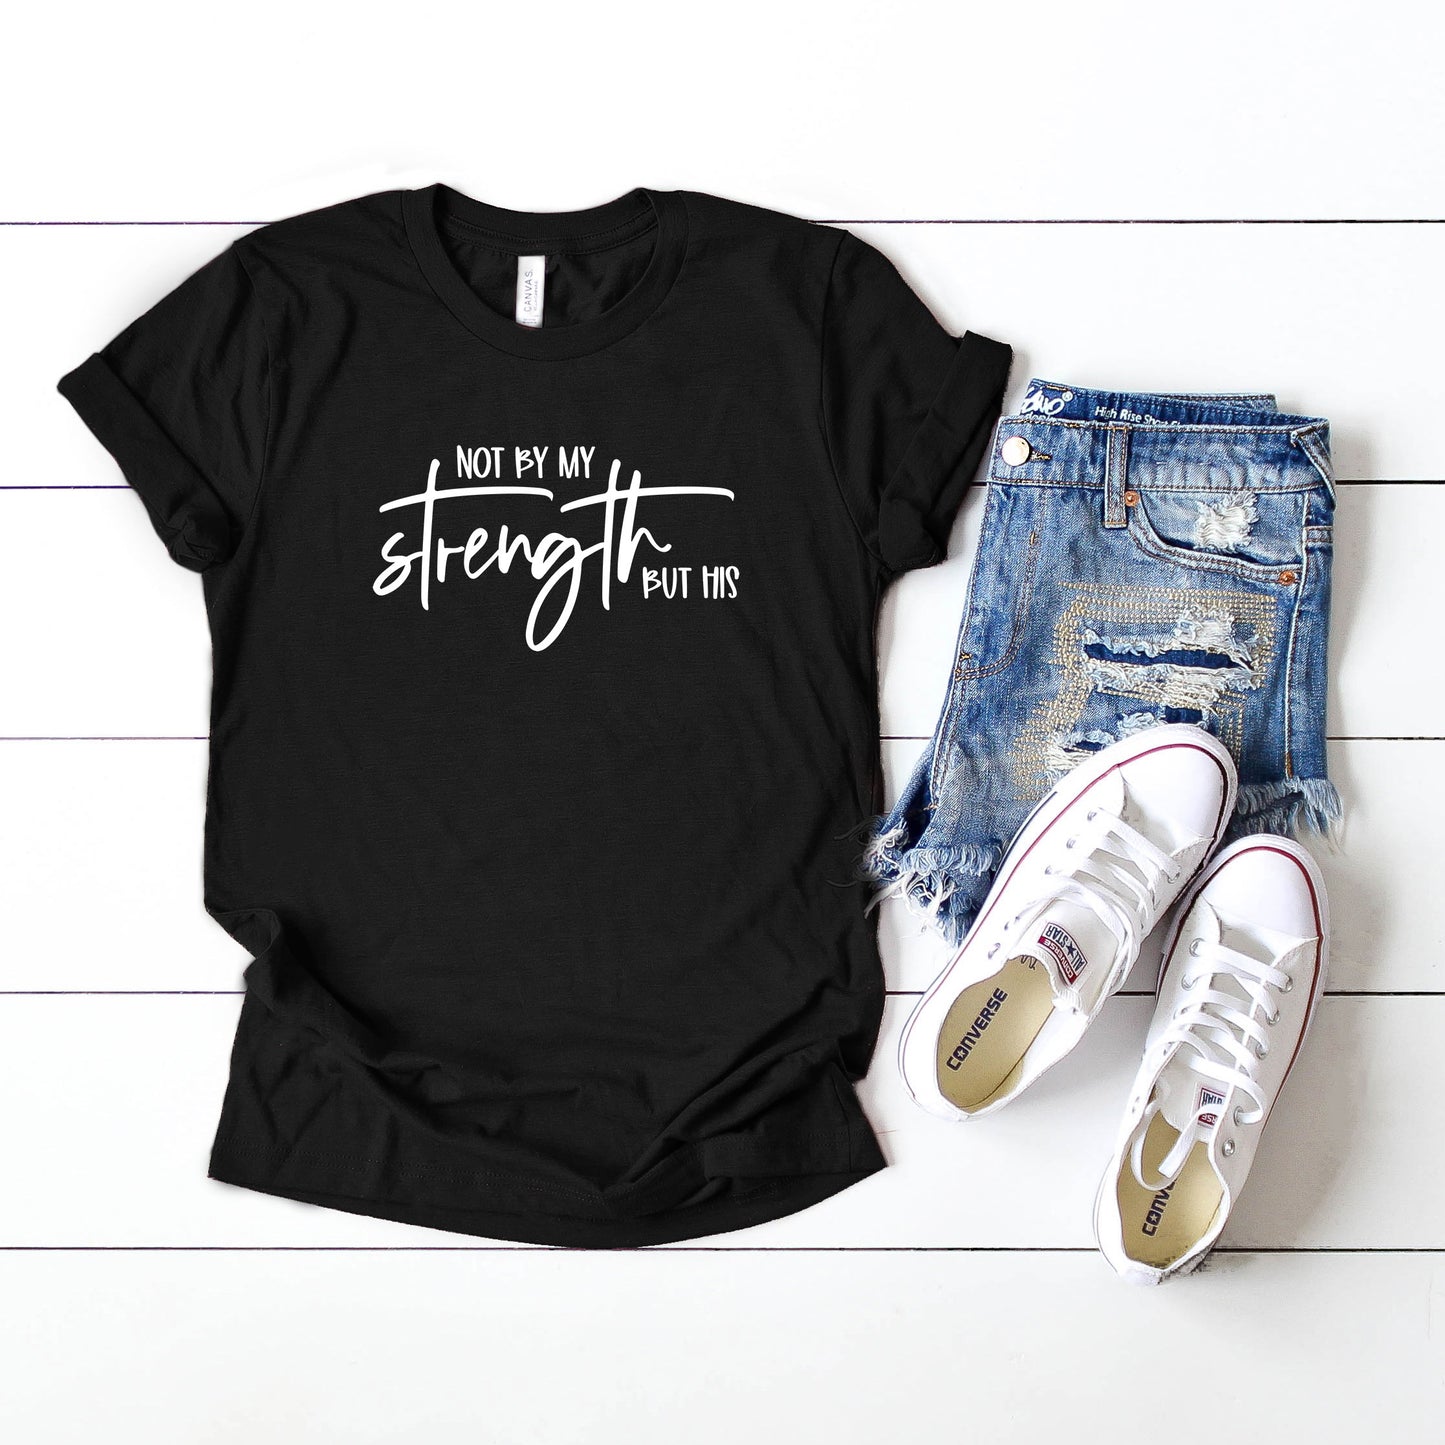 Not By My Own Strength | Short Sleeve Crew Neck